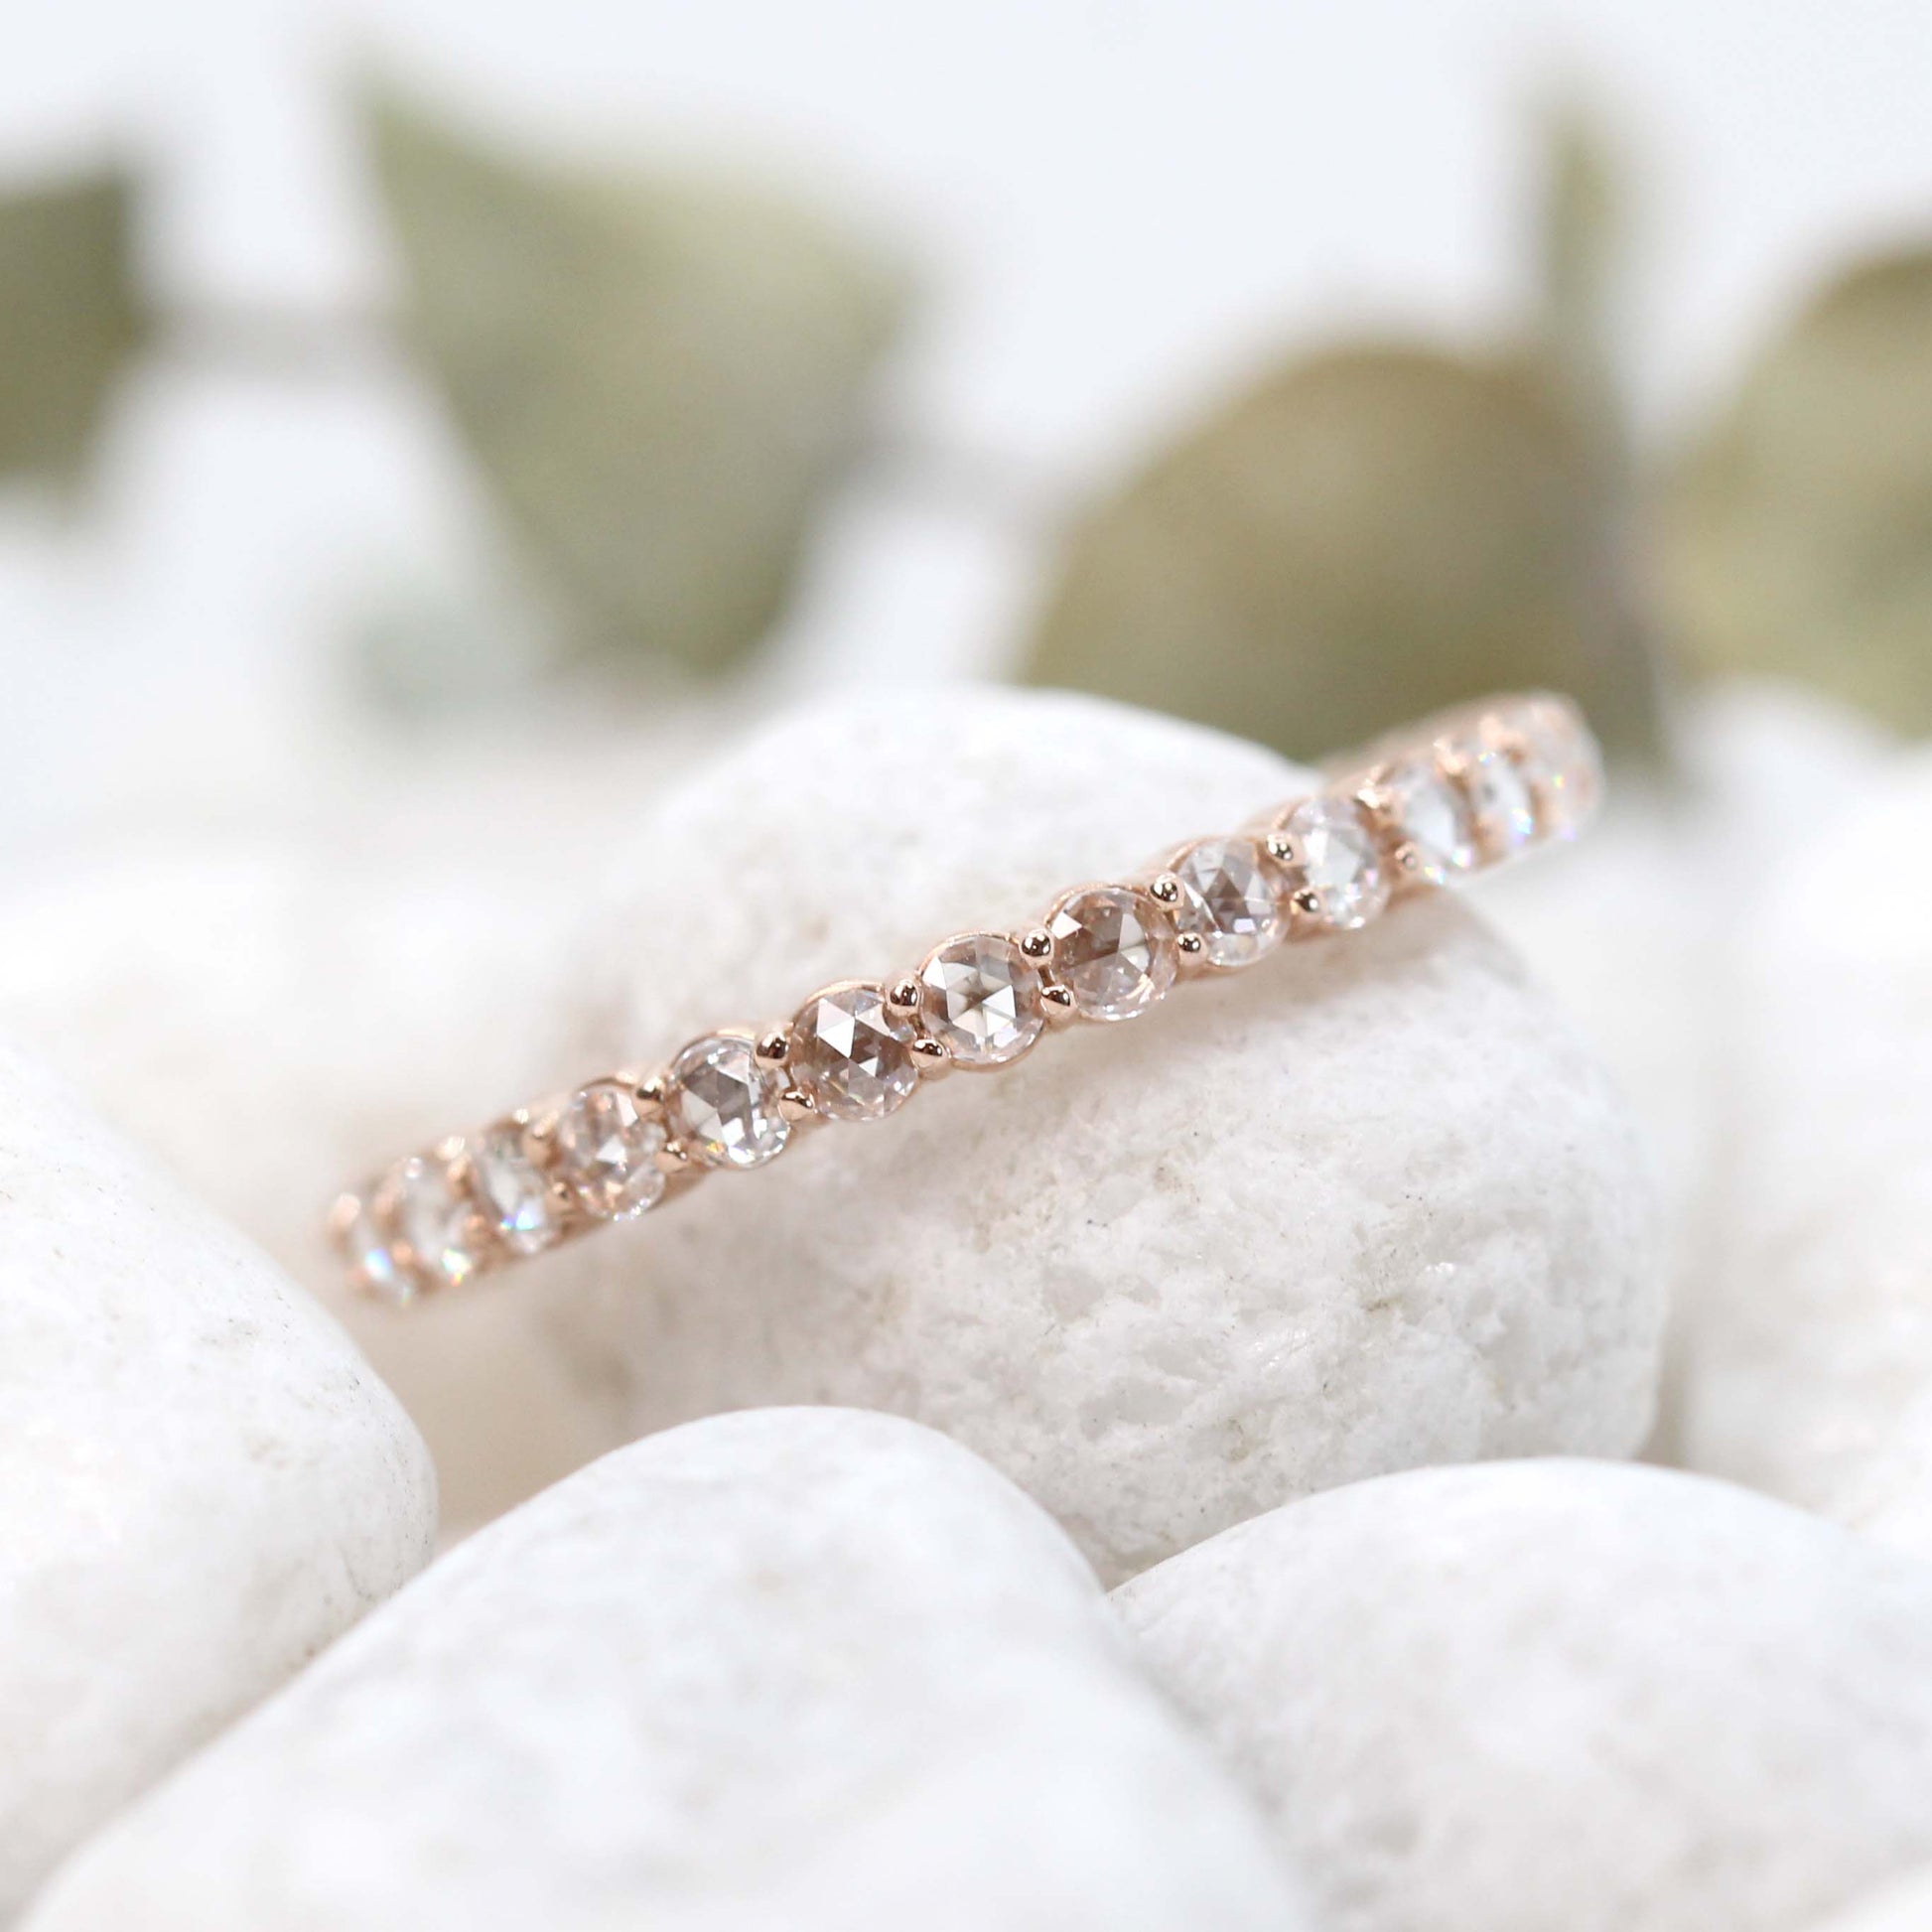 CAELEN (M) Paige - Diamond Stackable Wedding Band in Your Choice of Gold - Midwinter Co. Alternative Bridal Rings and Modern Fine Jewelry